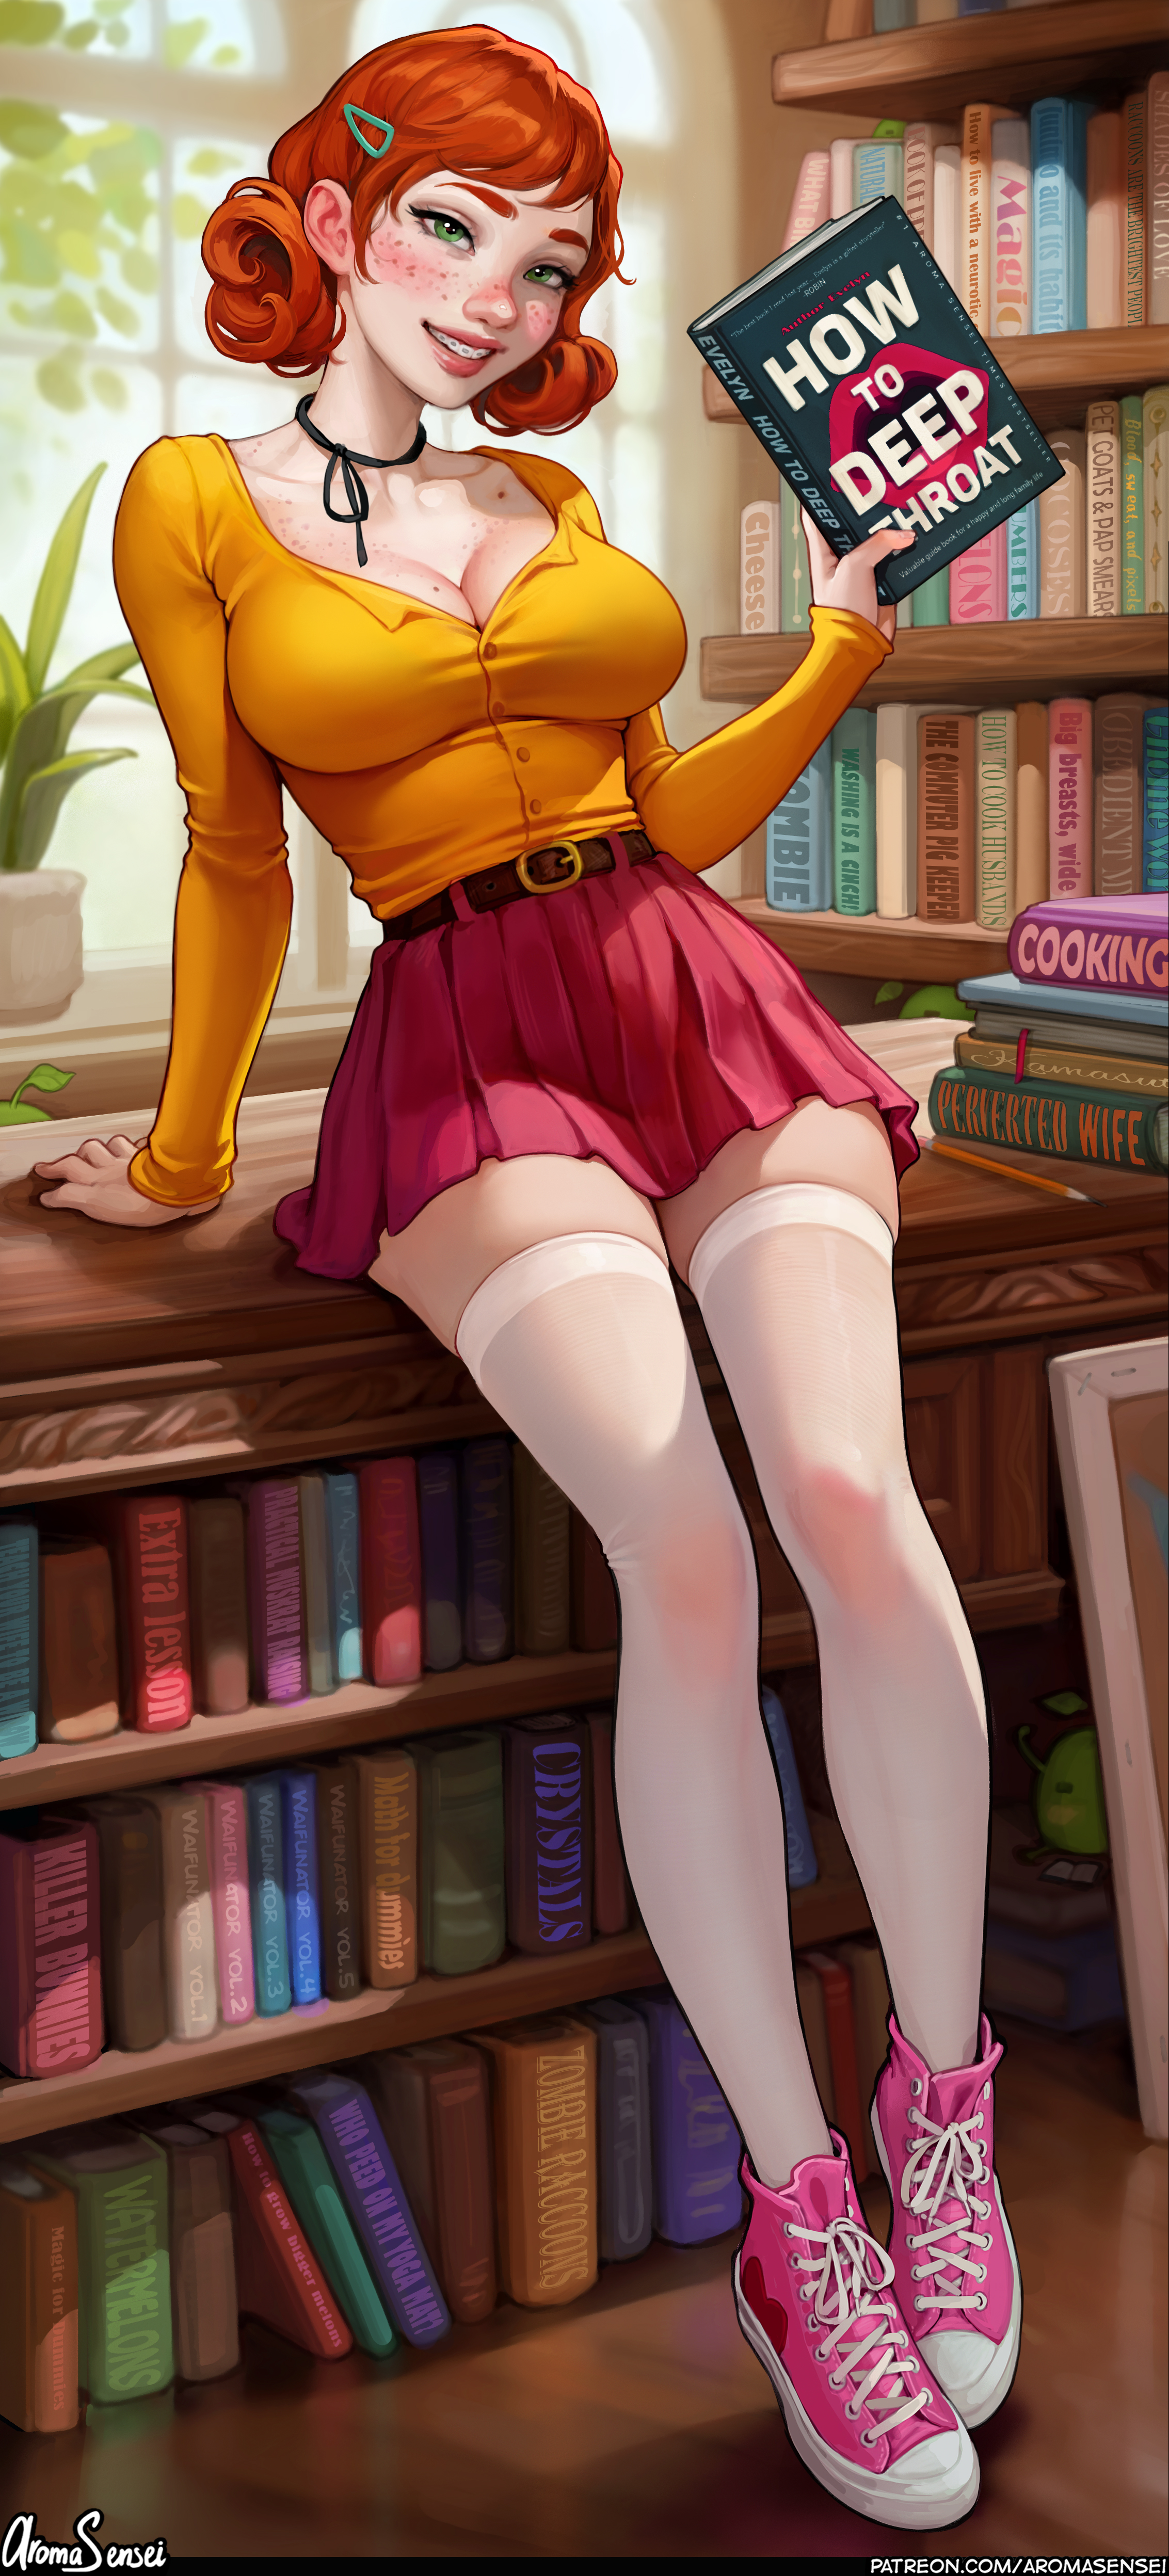 General 2265x4992 Penny (Stardew Valley) video game characters artwork drawing fan art Aroma Sensei white thigh highs sneakers pink sneakers sitting miniskirt yellow tops cleavage book in hand tiptoe big boobs freckles (body) freckles books bookshelves library watermarked video game girls skirt video games shelves blushing Stardew Valley